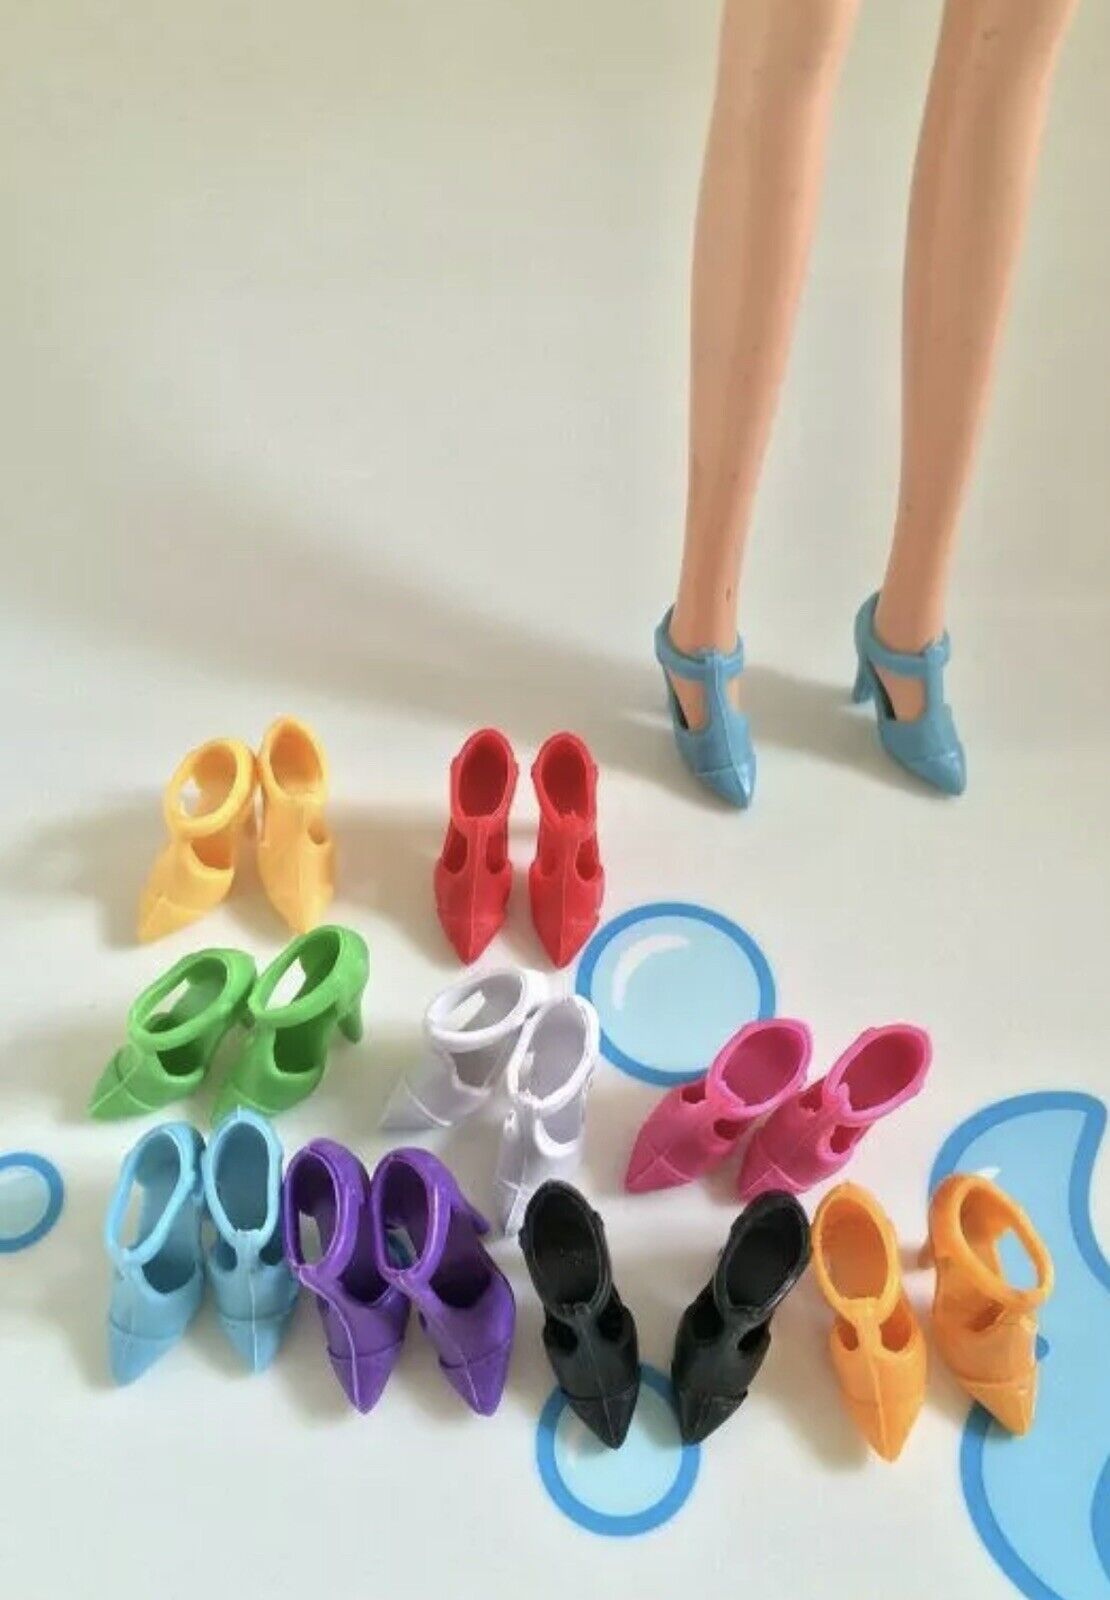 40 Pairs 7 colour High Heel  pliable silicone Shoes for11.5" (30CM) Doll F5 Unbranded - фотография #6